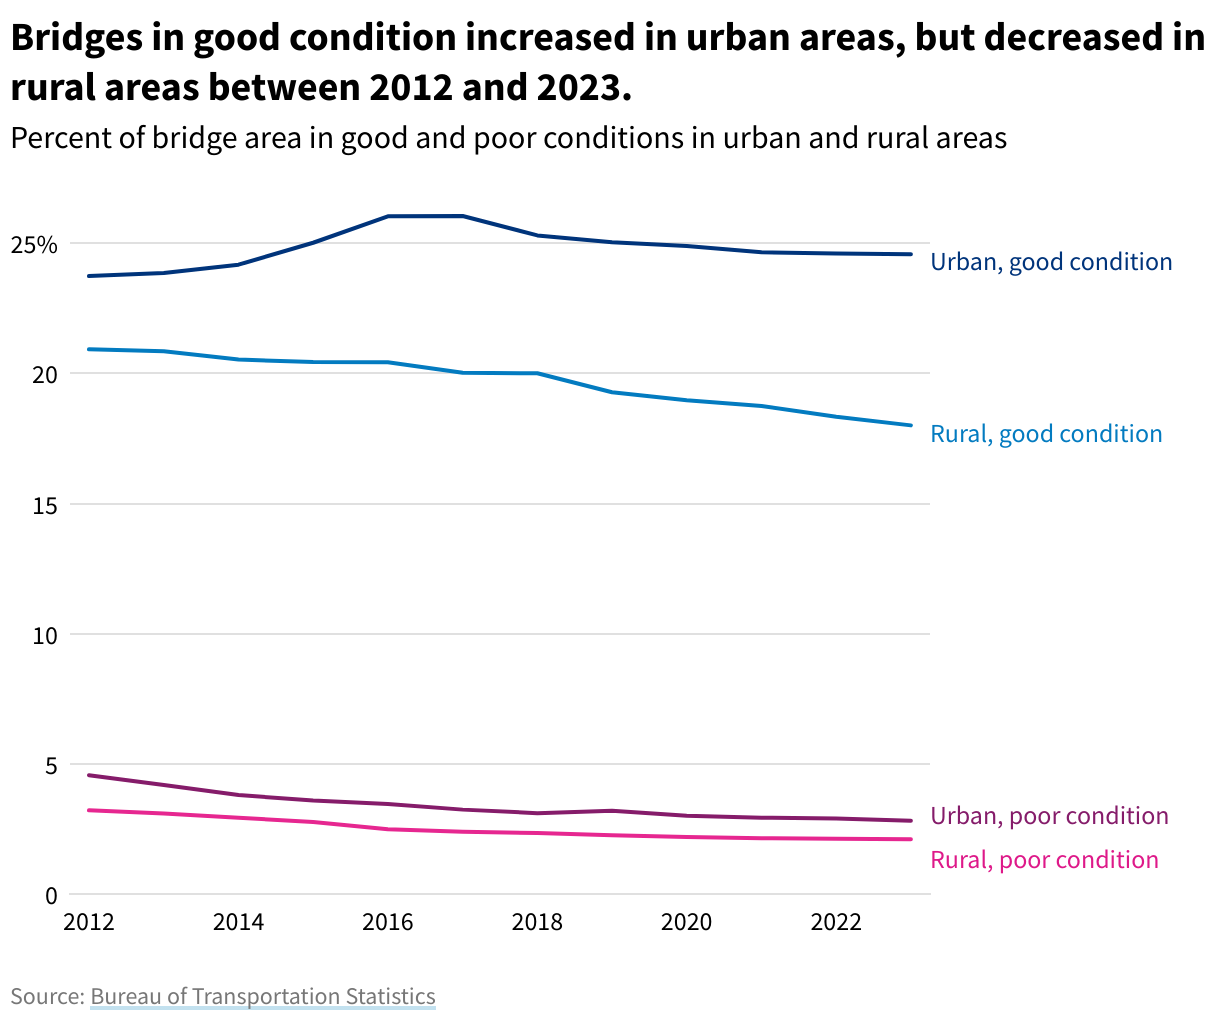 A line chart showing the percent of bridge area in good and poor conditions in urban and rural areas between 2012 and 2022. Two upper lines show bridges in good condition in urban areas increased from 24% to above 24%, whereas bridges in rural areas in good conditions decreased from 21% to around 18%. Bridges in poor condition in urban and rural areas decreased from around 4% to around 3%.